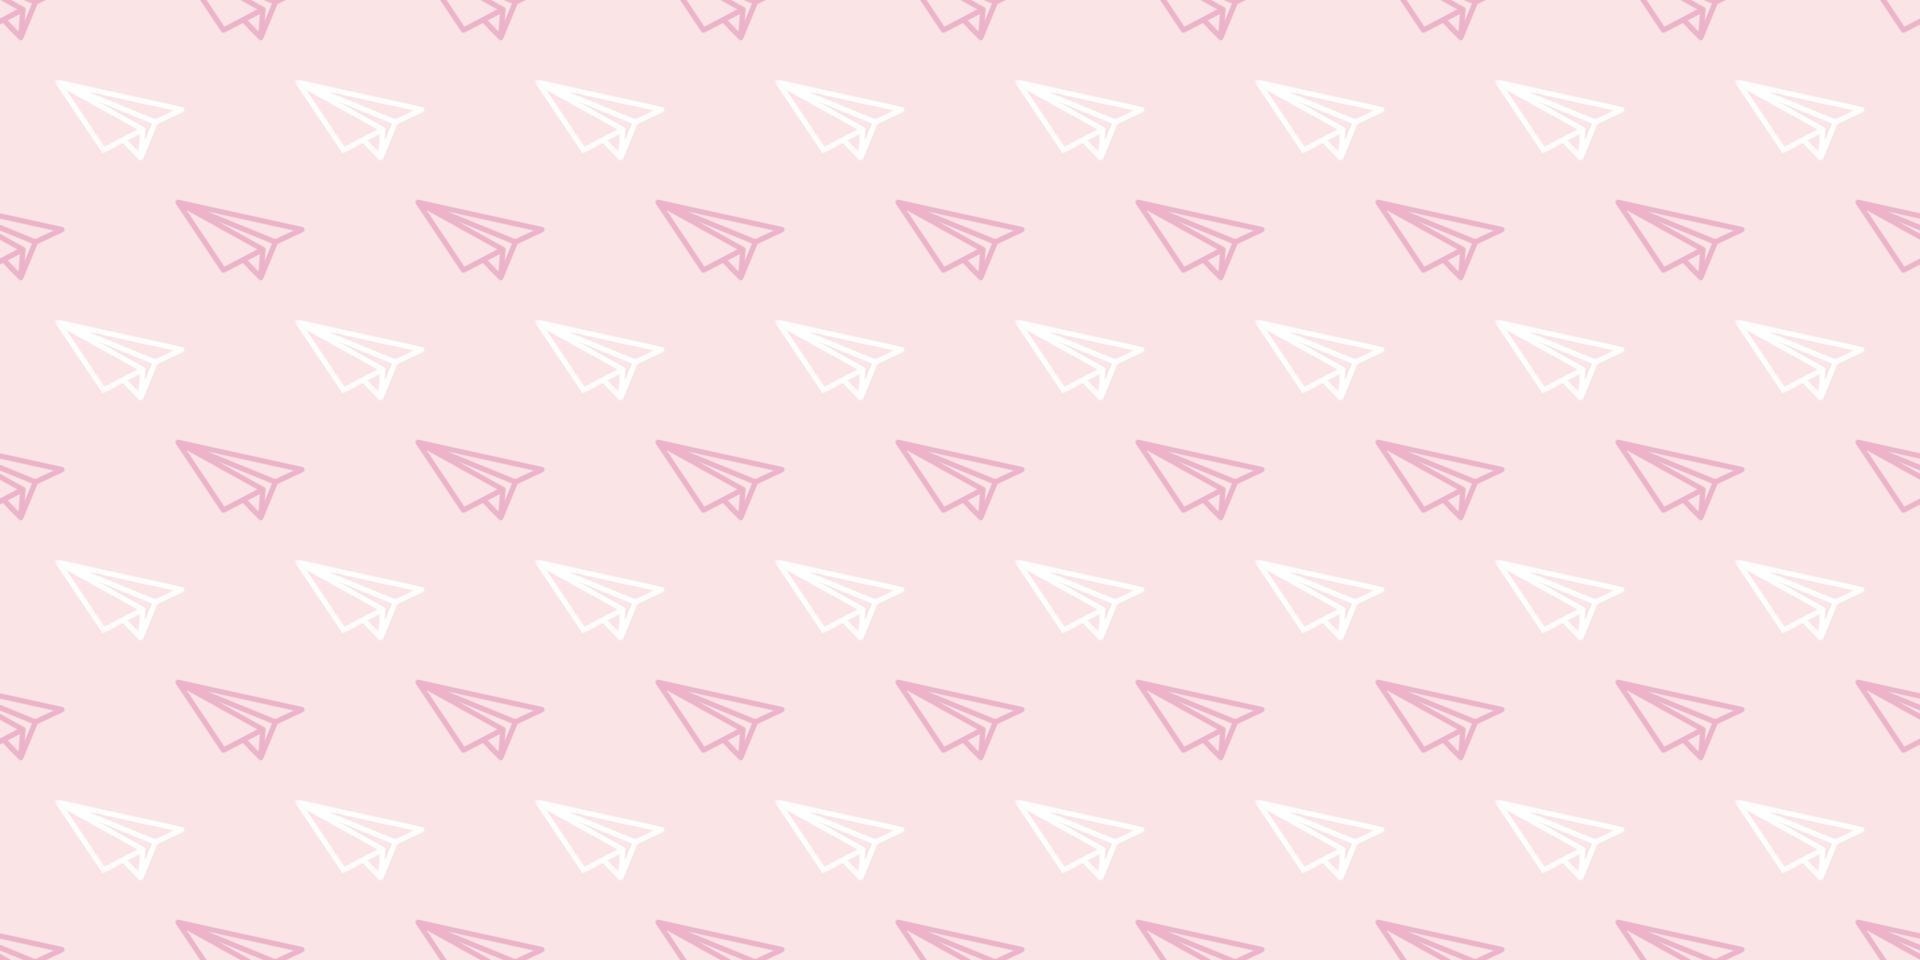 Pastel paper plane seamless repeat pattern vector background